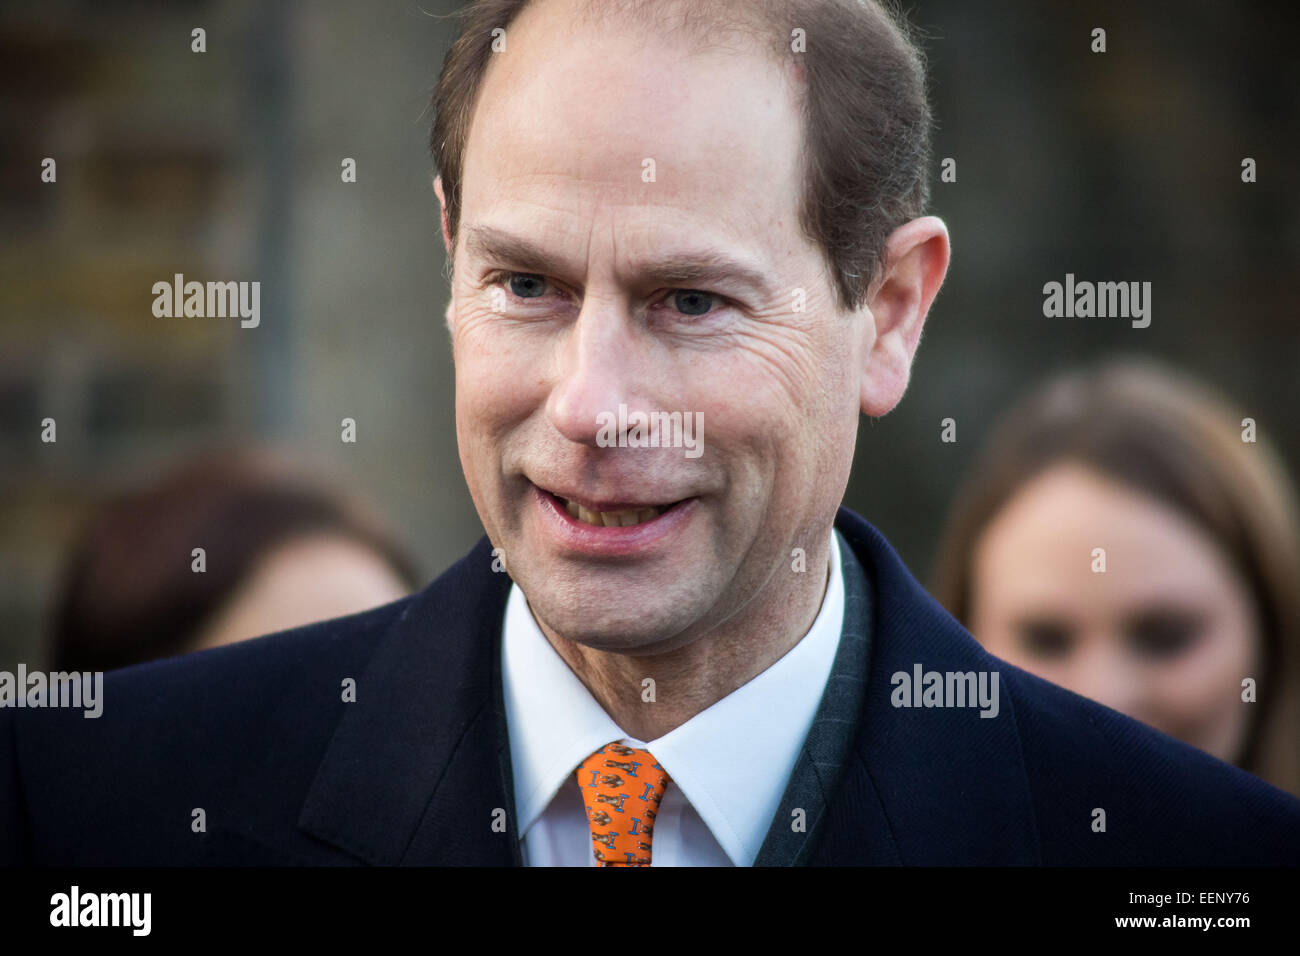 London, UK. 20th Jan, 2015. The Earl and Countess of Wessex attend an engagement in support of The Queen's Diamond Jubilee Trust and Tomorrow's People charity on The Countess' 50th birthday at St. Anselm's Church, Kennington. Credit: Guy Corbishley/Alamy Live News Stock Photo